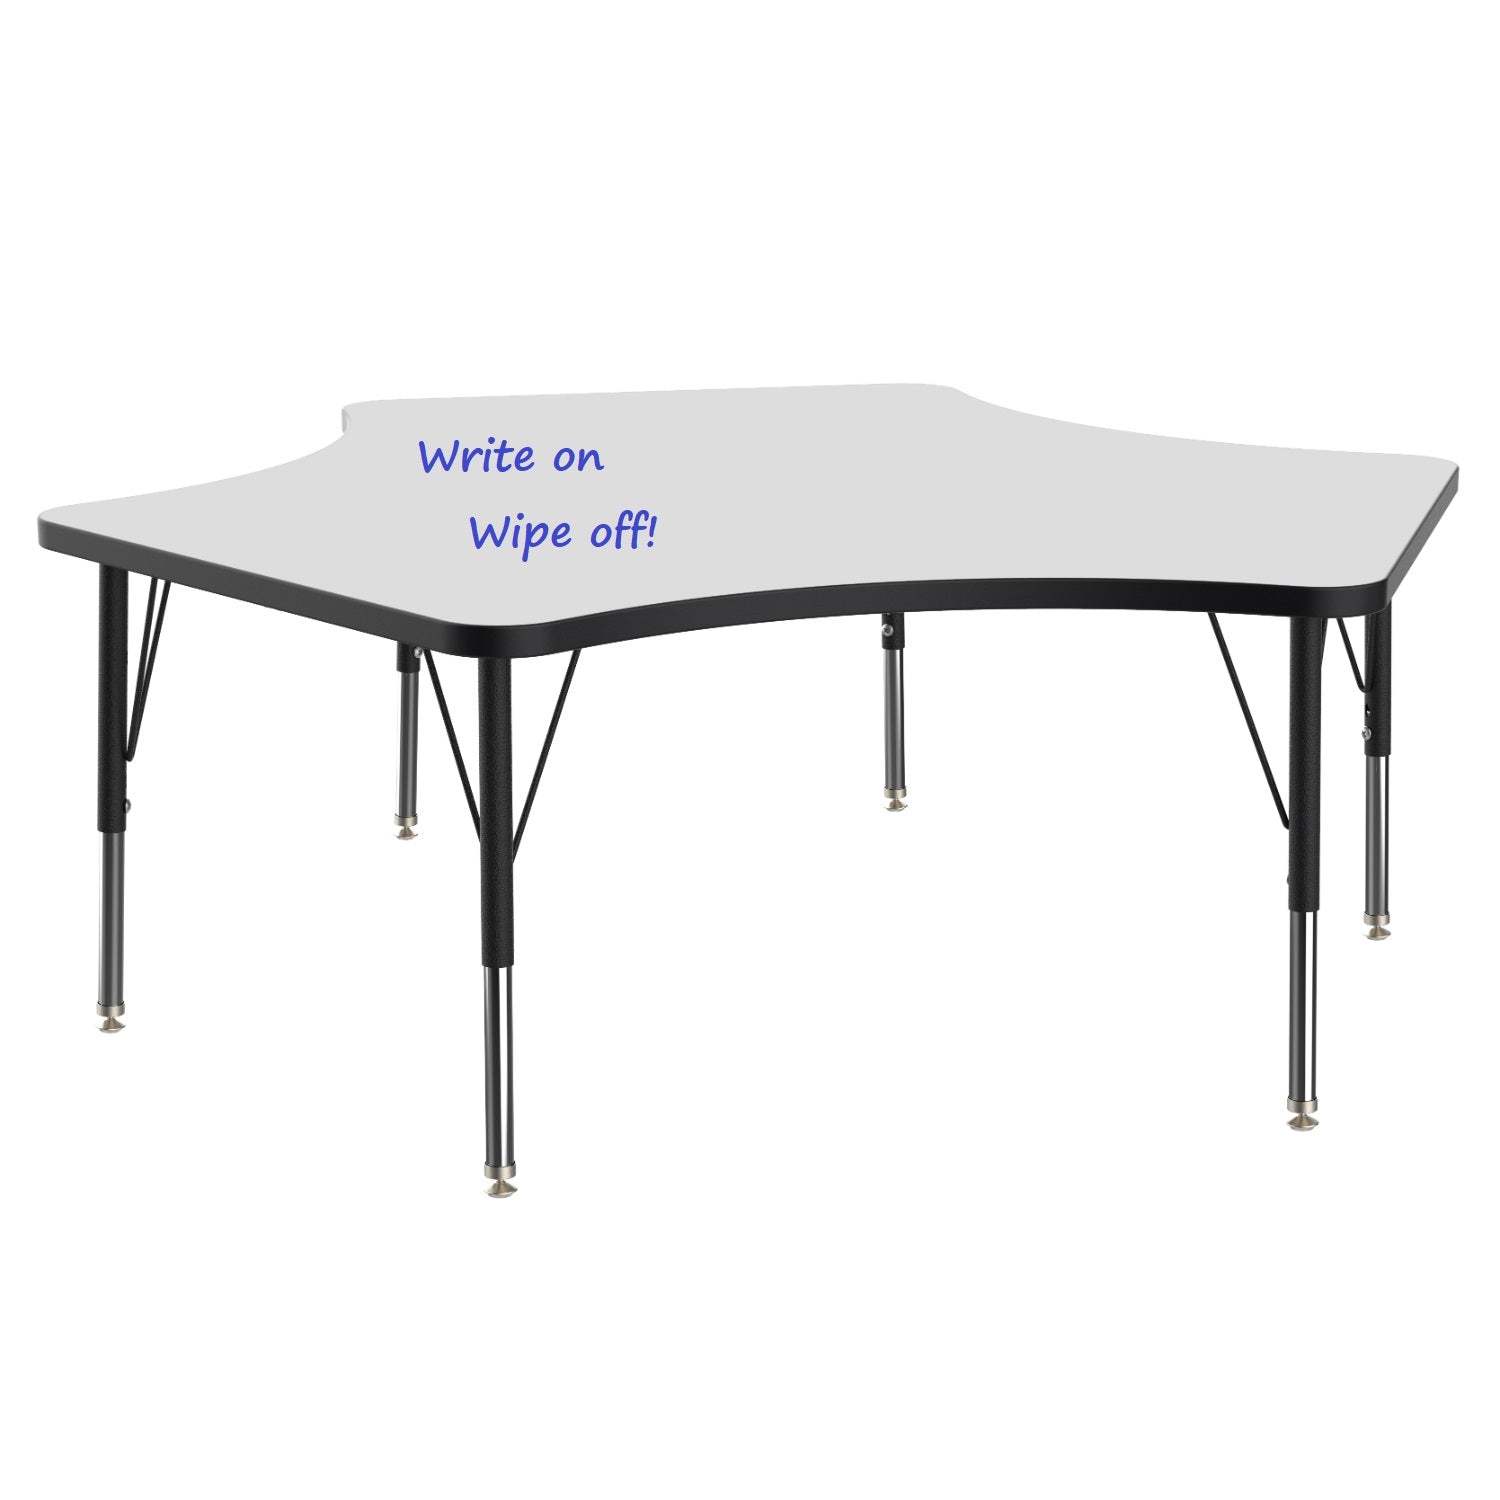 MG Series Adjustable Height Activity Table with White Dry Erase Markerboard Top, 60" x 60" Delta